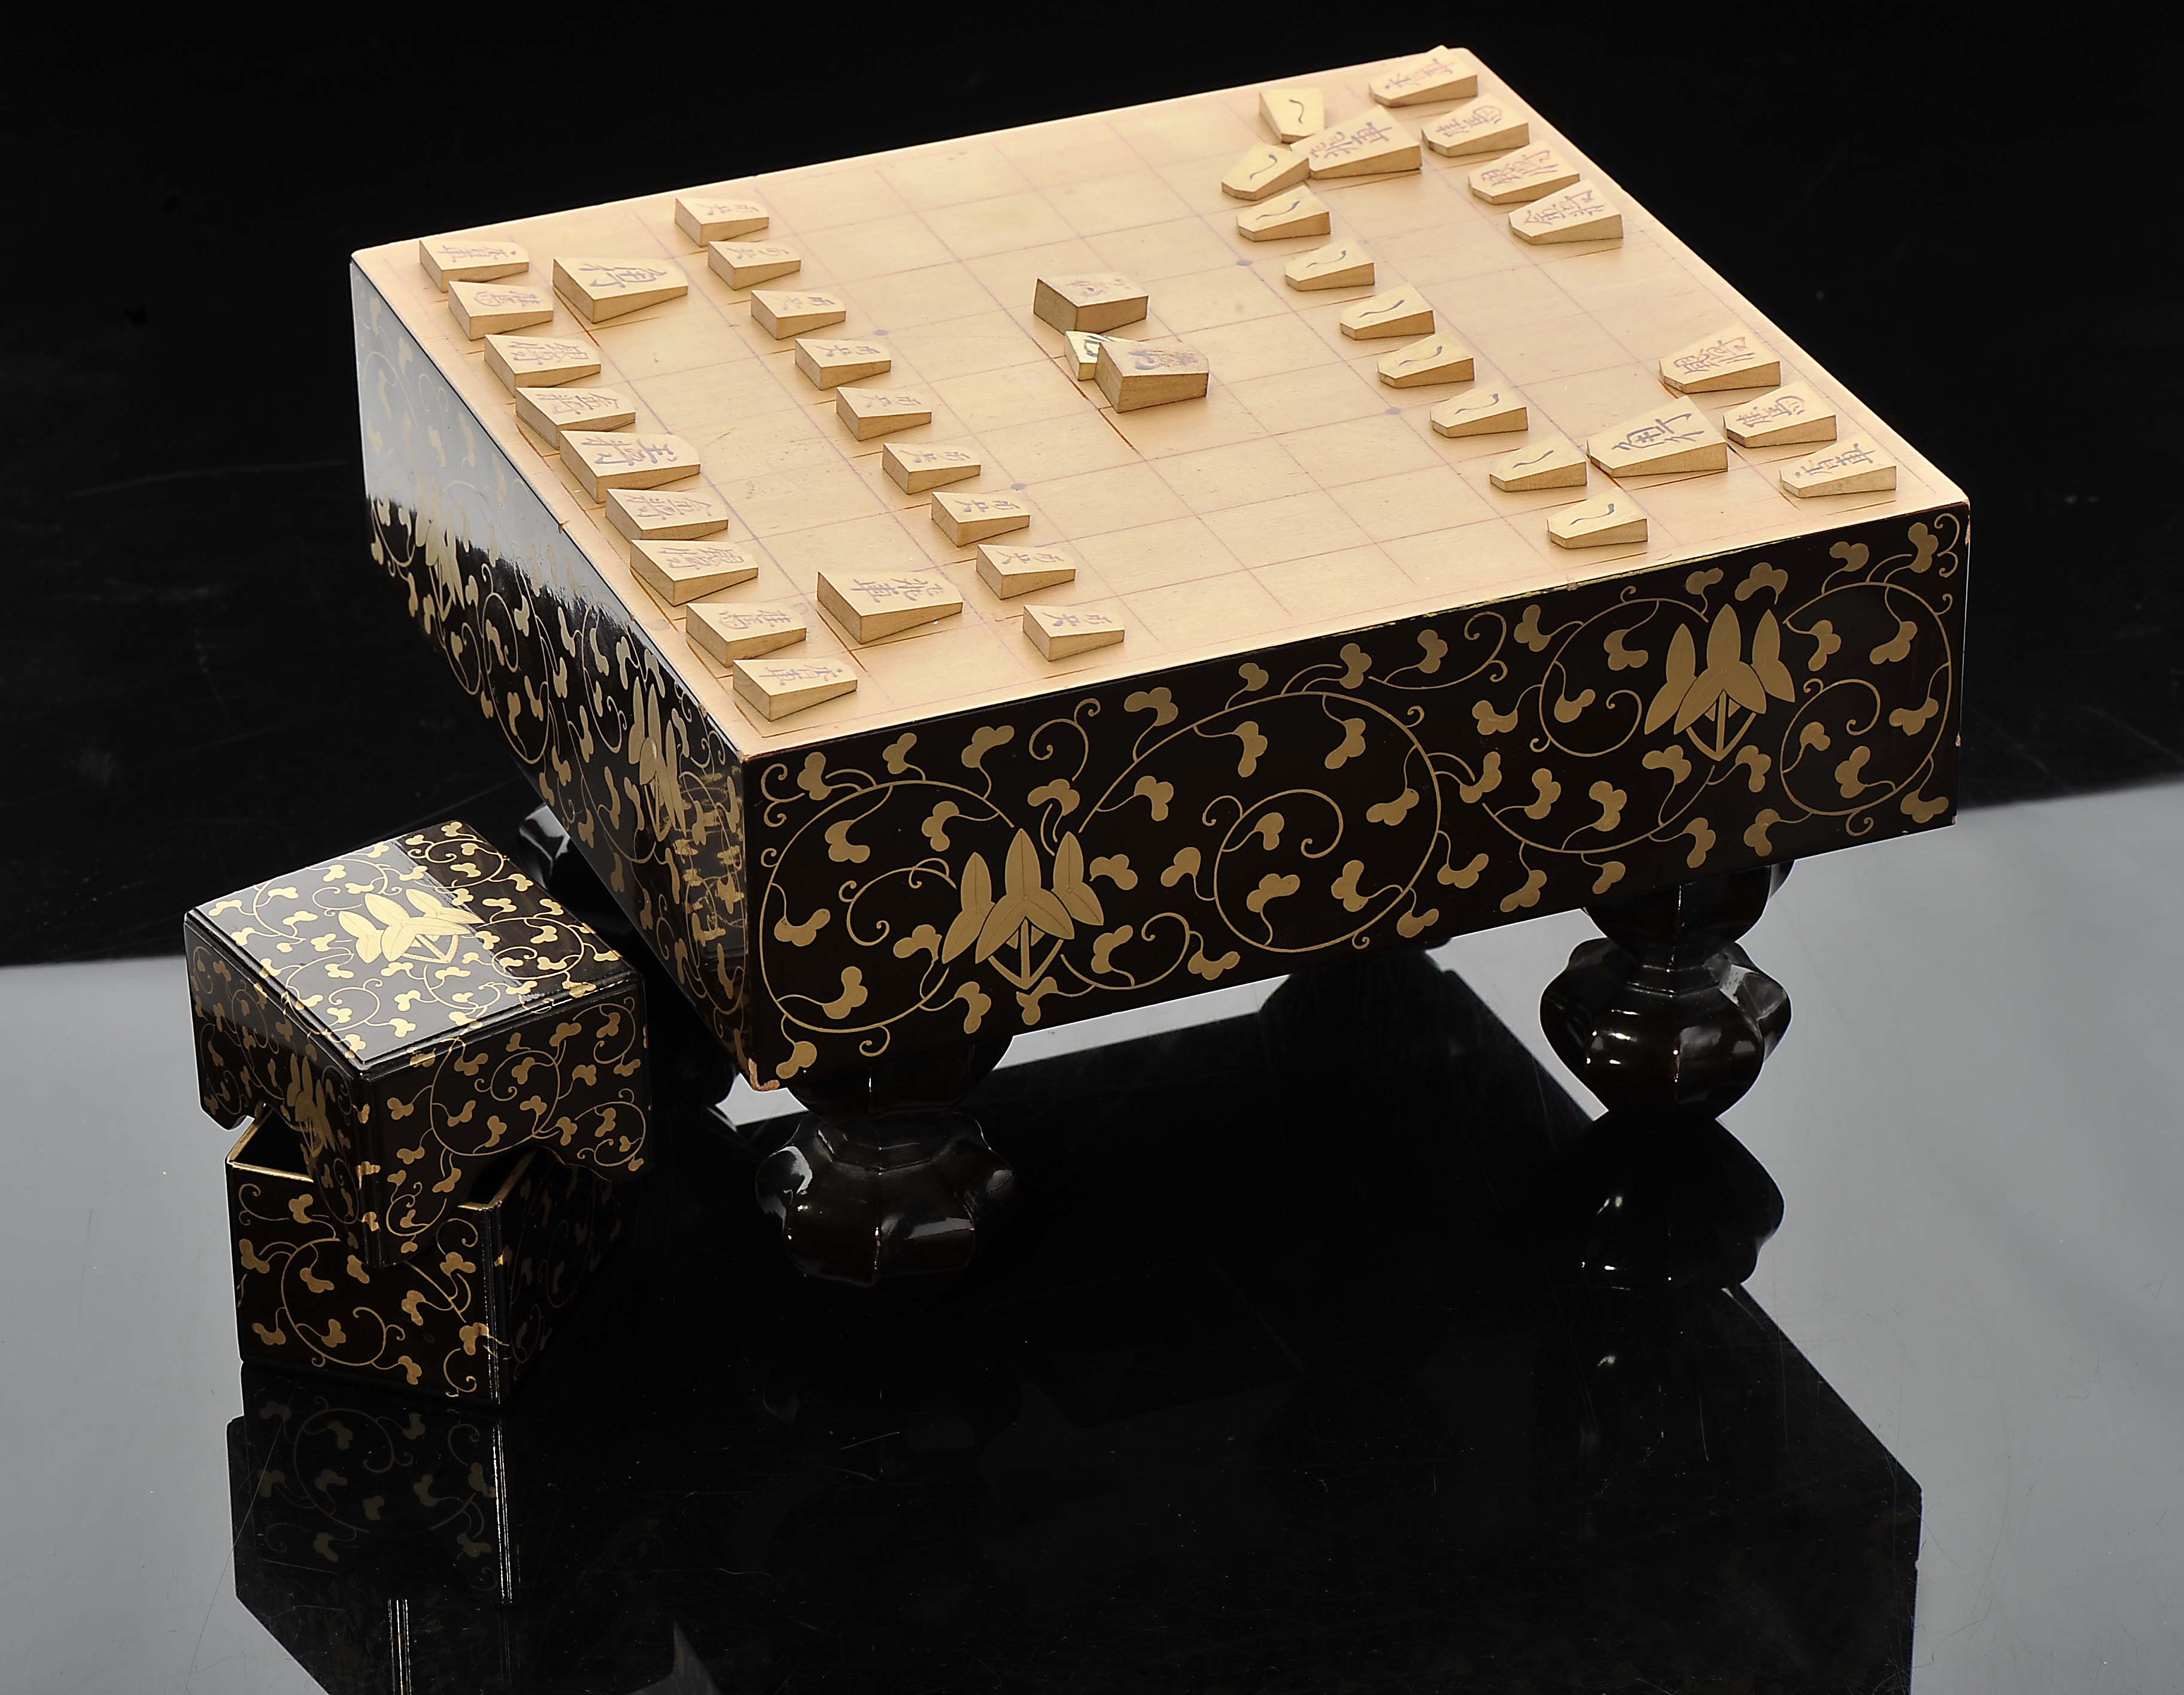 Shogi table/board with forty pieces in "Tomobako" box - Image 9 of 17